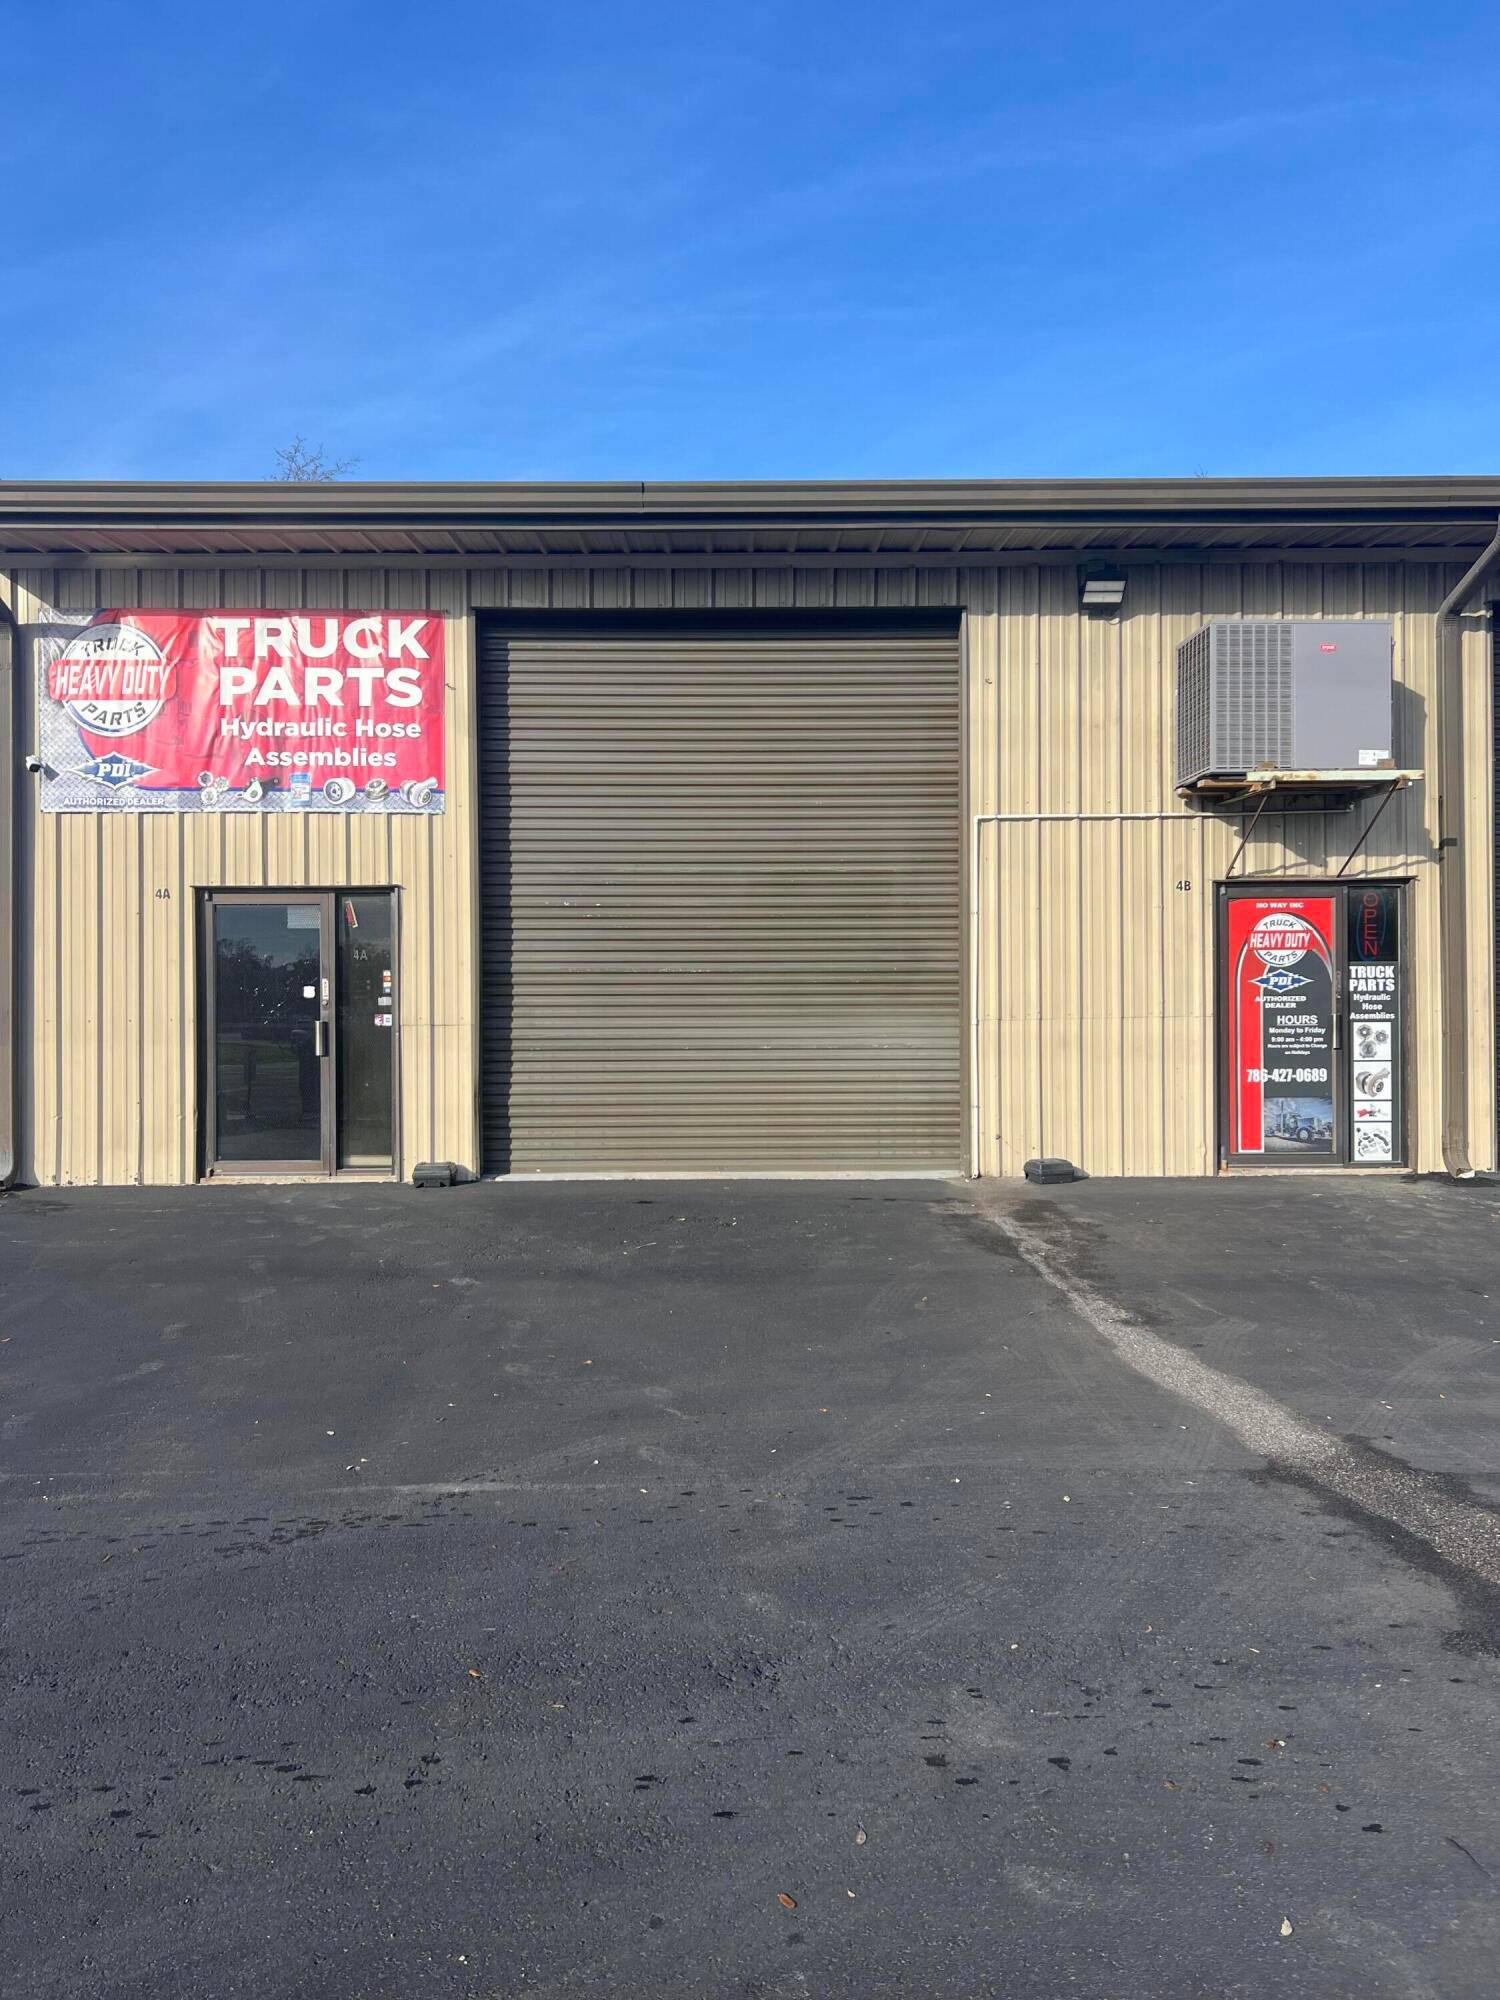 This fantastic truck parts business property includes two units and is located in Tampa and is conveniently accessible from both Interstate I 4 and crosstown Expressway.